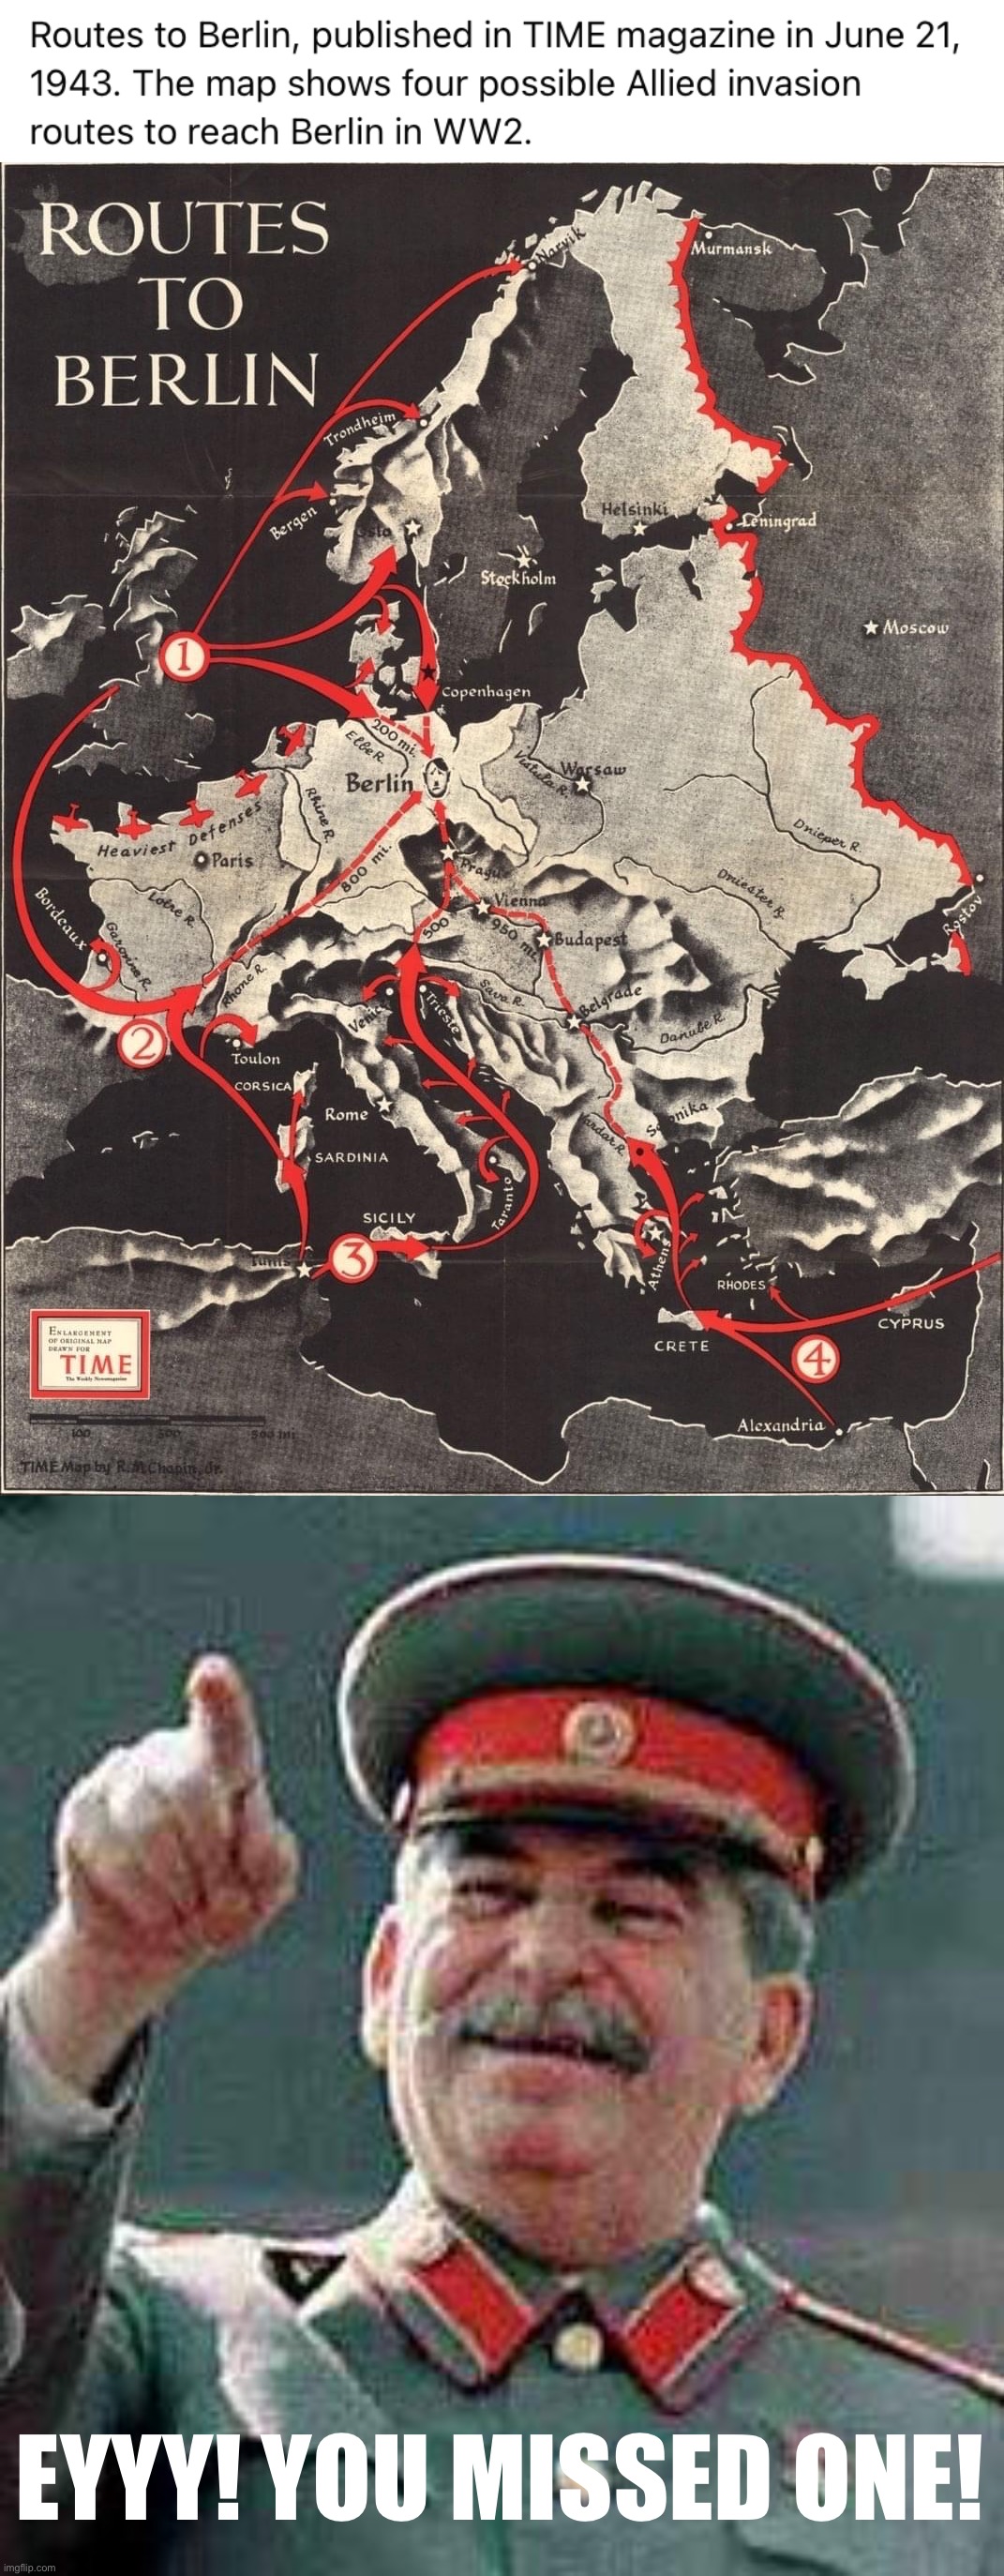 Conspicuously absent: The route from R u s s i a | EYYY! YOU MISSED ONE! | image tagged in routes to berlin,stalin says,wwii,world war 2,world war ii | made w/ Imgflip meme maker